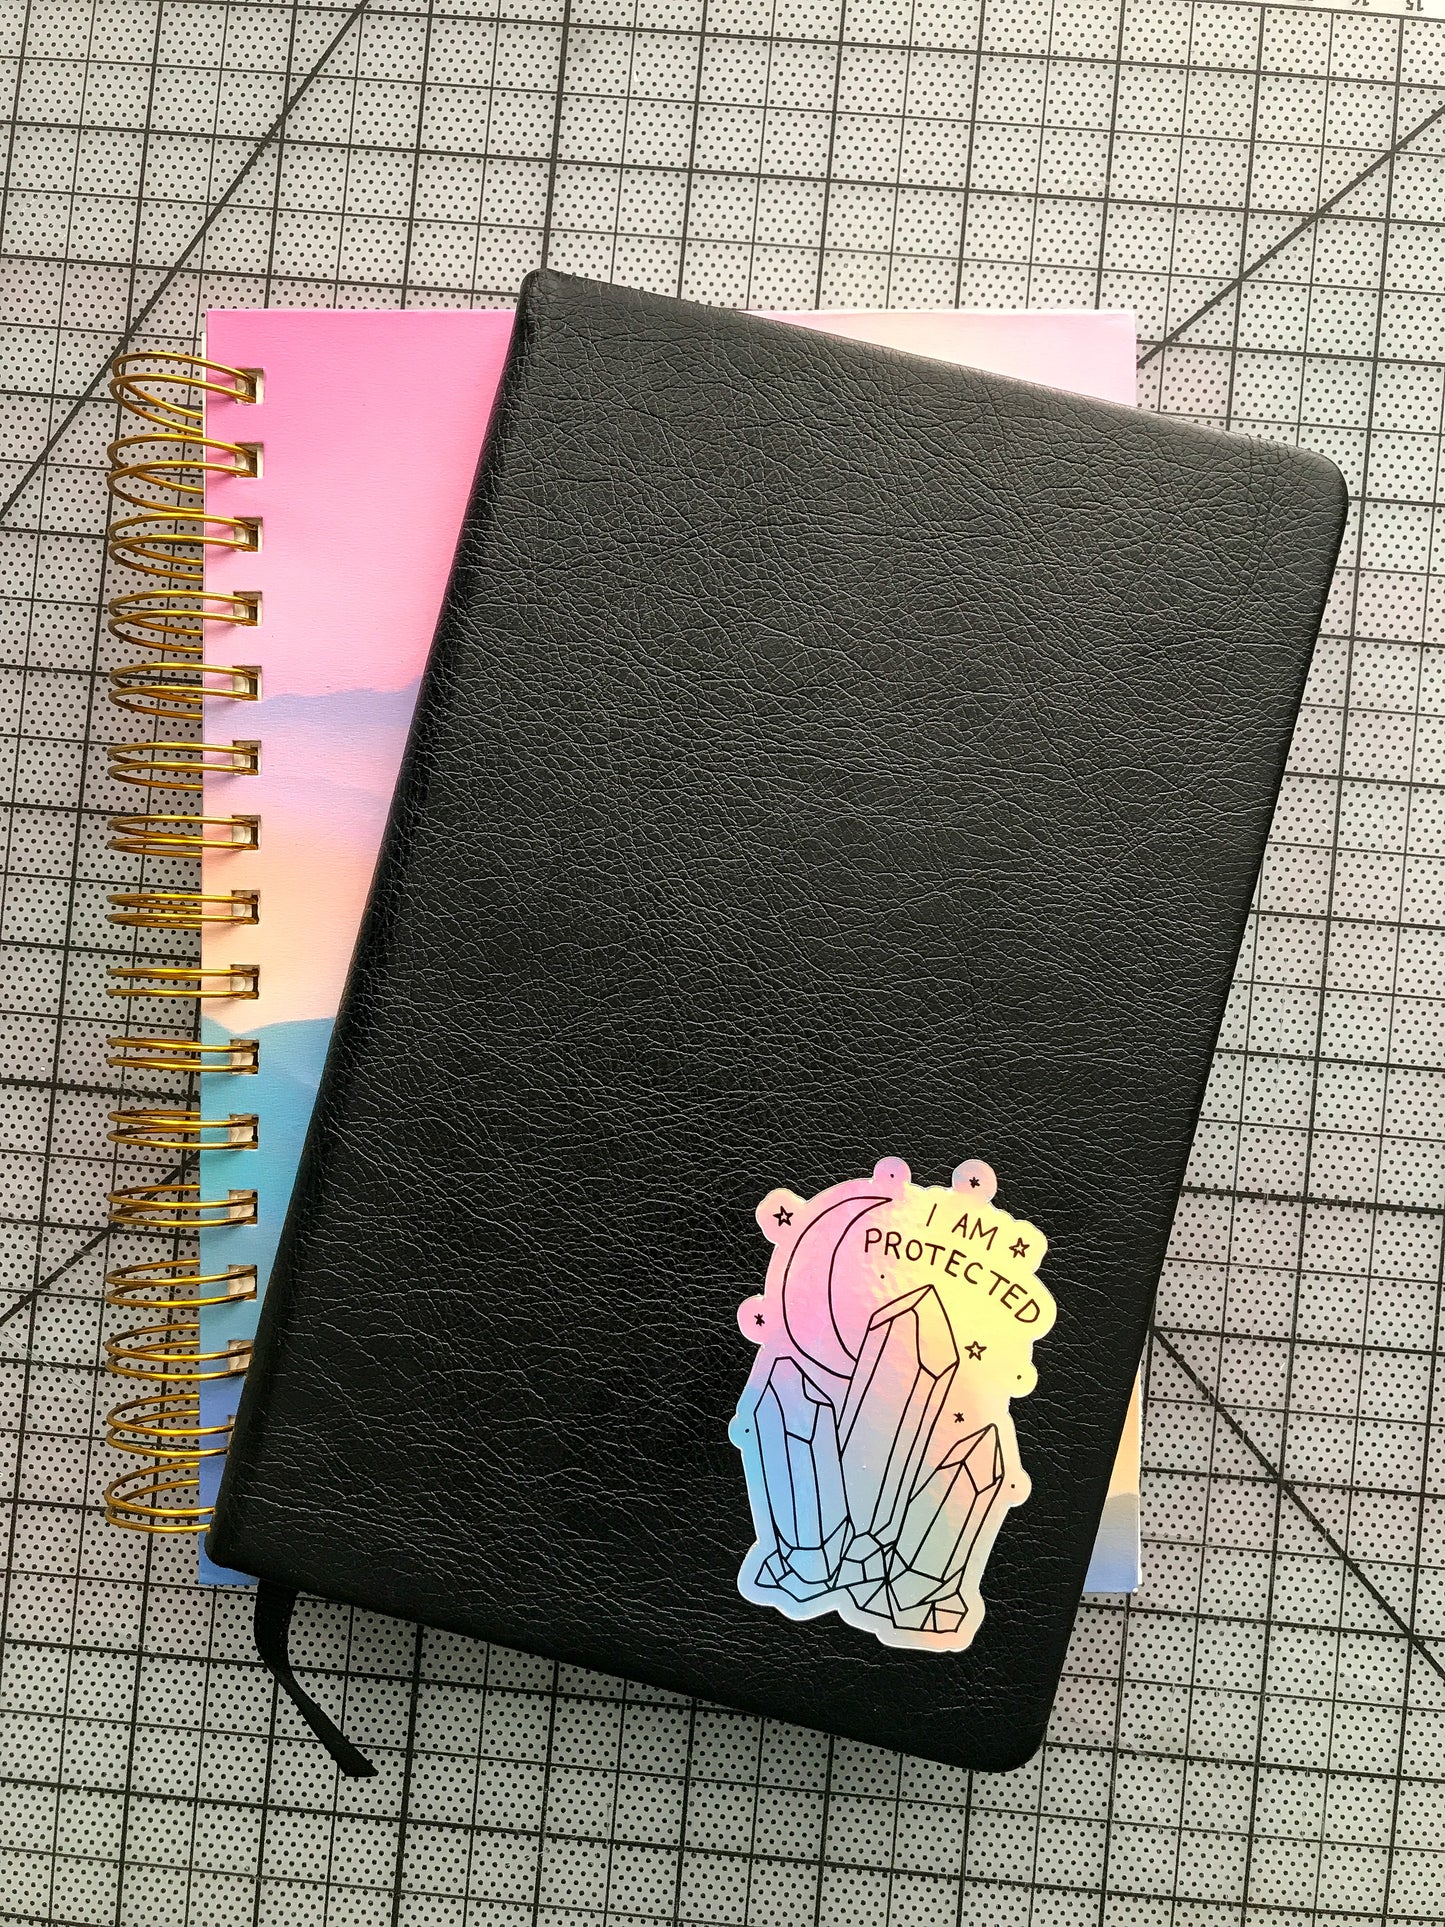 "I Am Protected" holographic sticker on journal cover